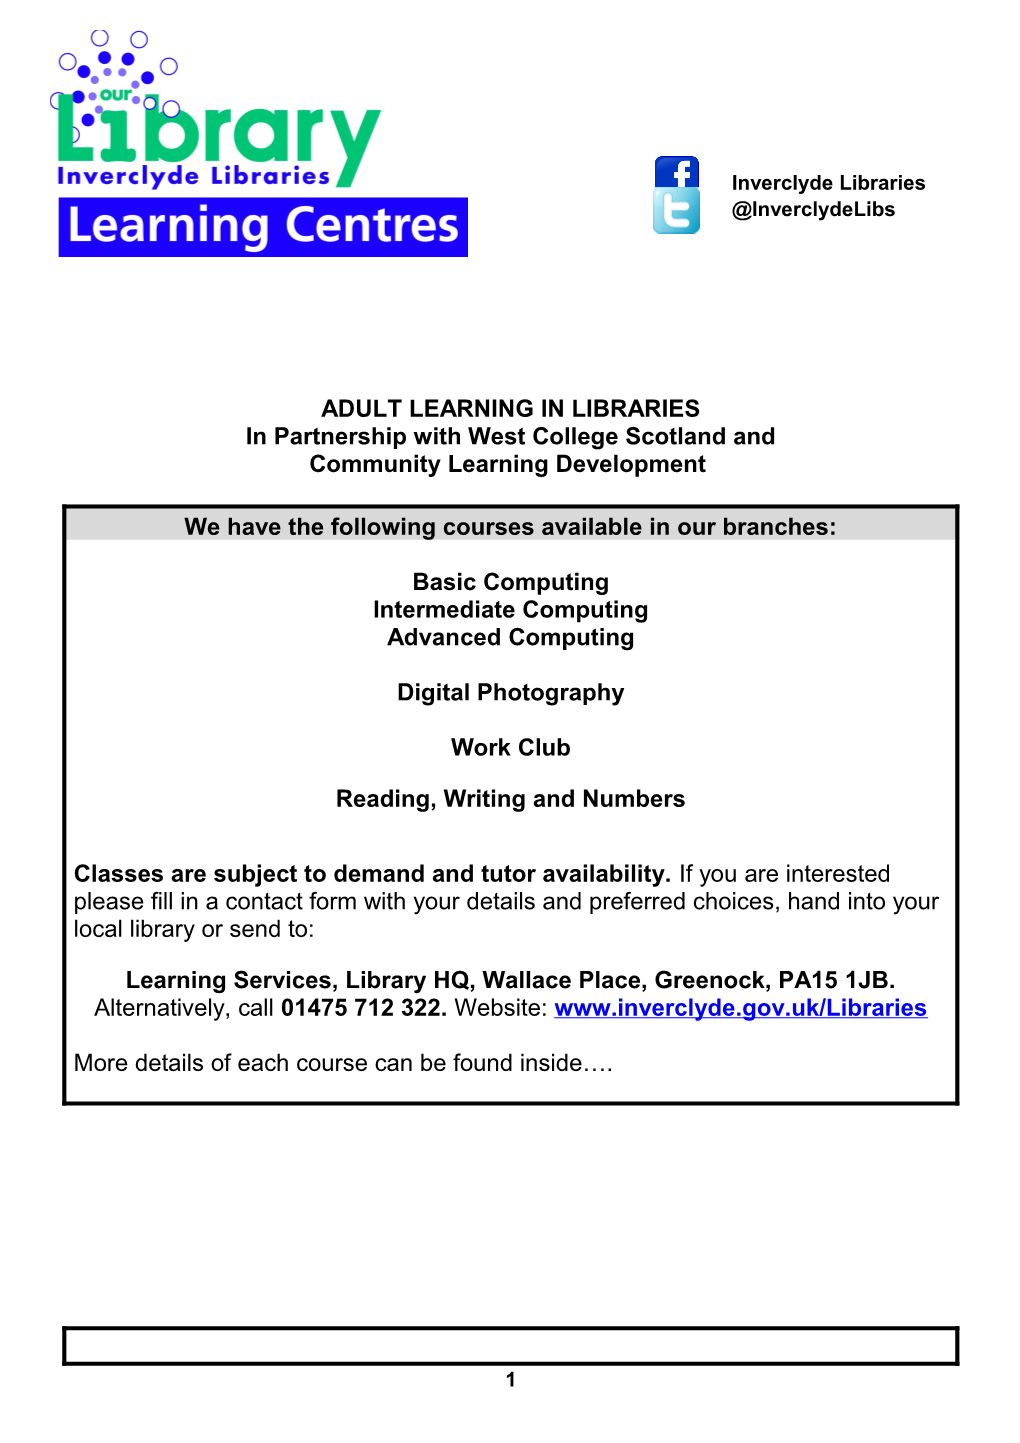 Computer Courses in Inverclyde Libraries